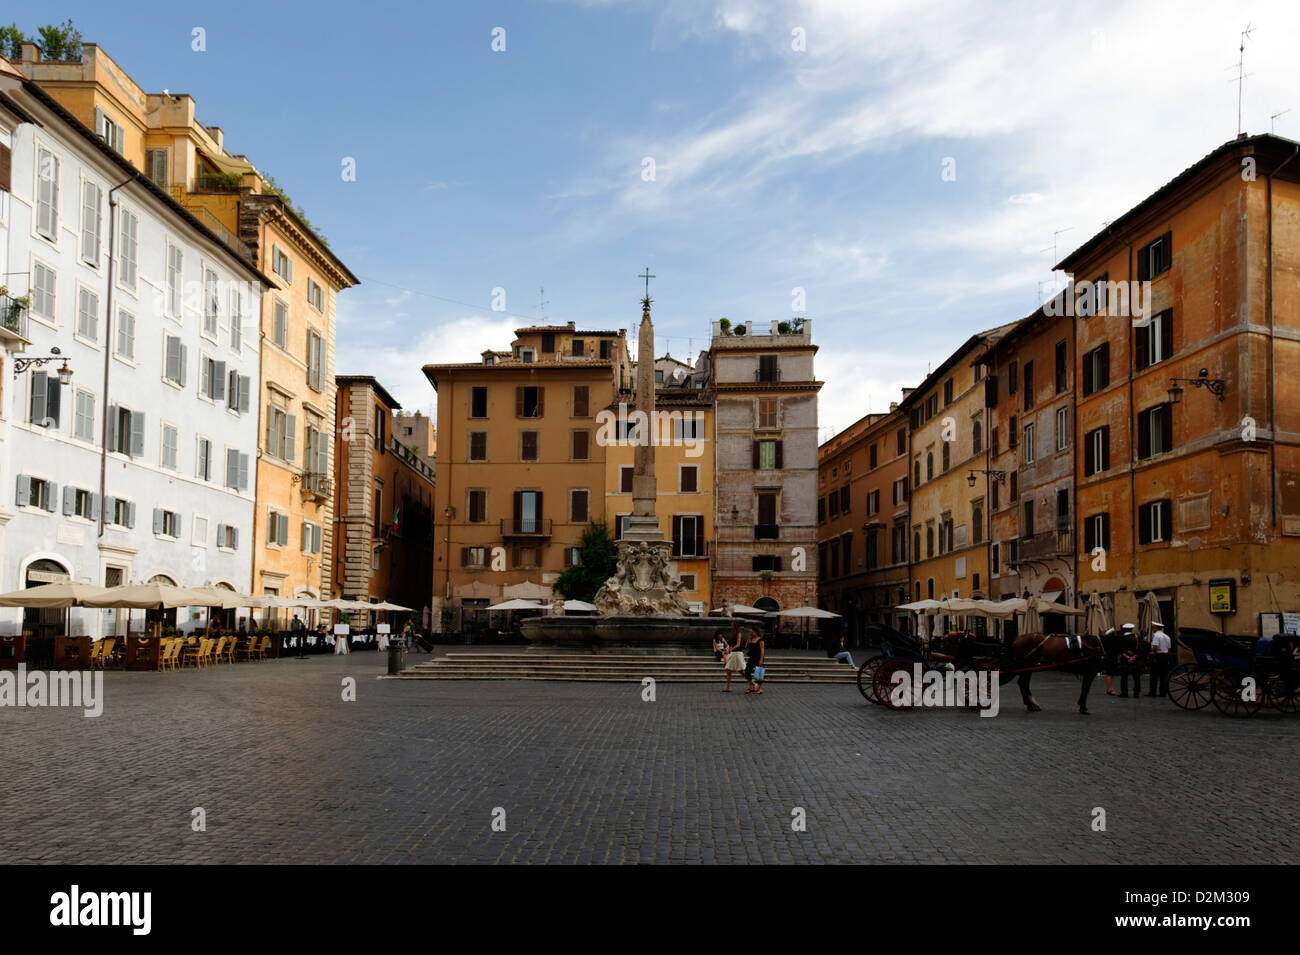 Rome. Italy. View of the Piazza della Rotonda in early morning which is located in front of the Pantheon Stock Photo